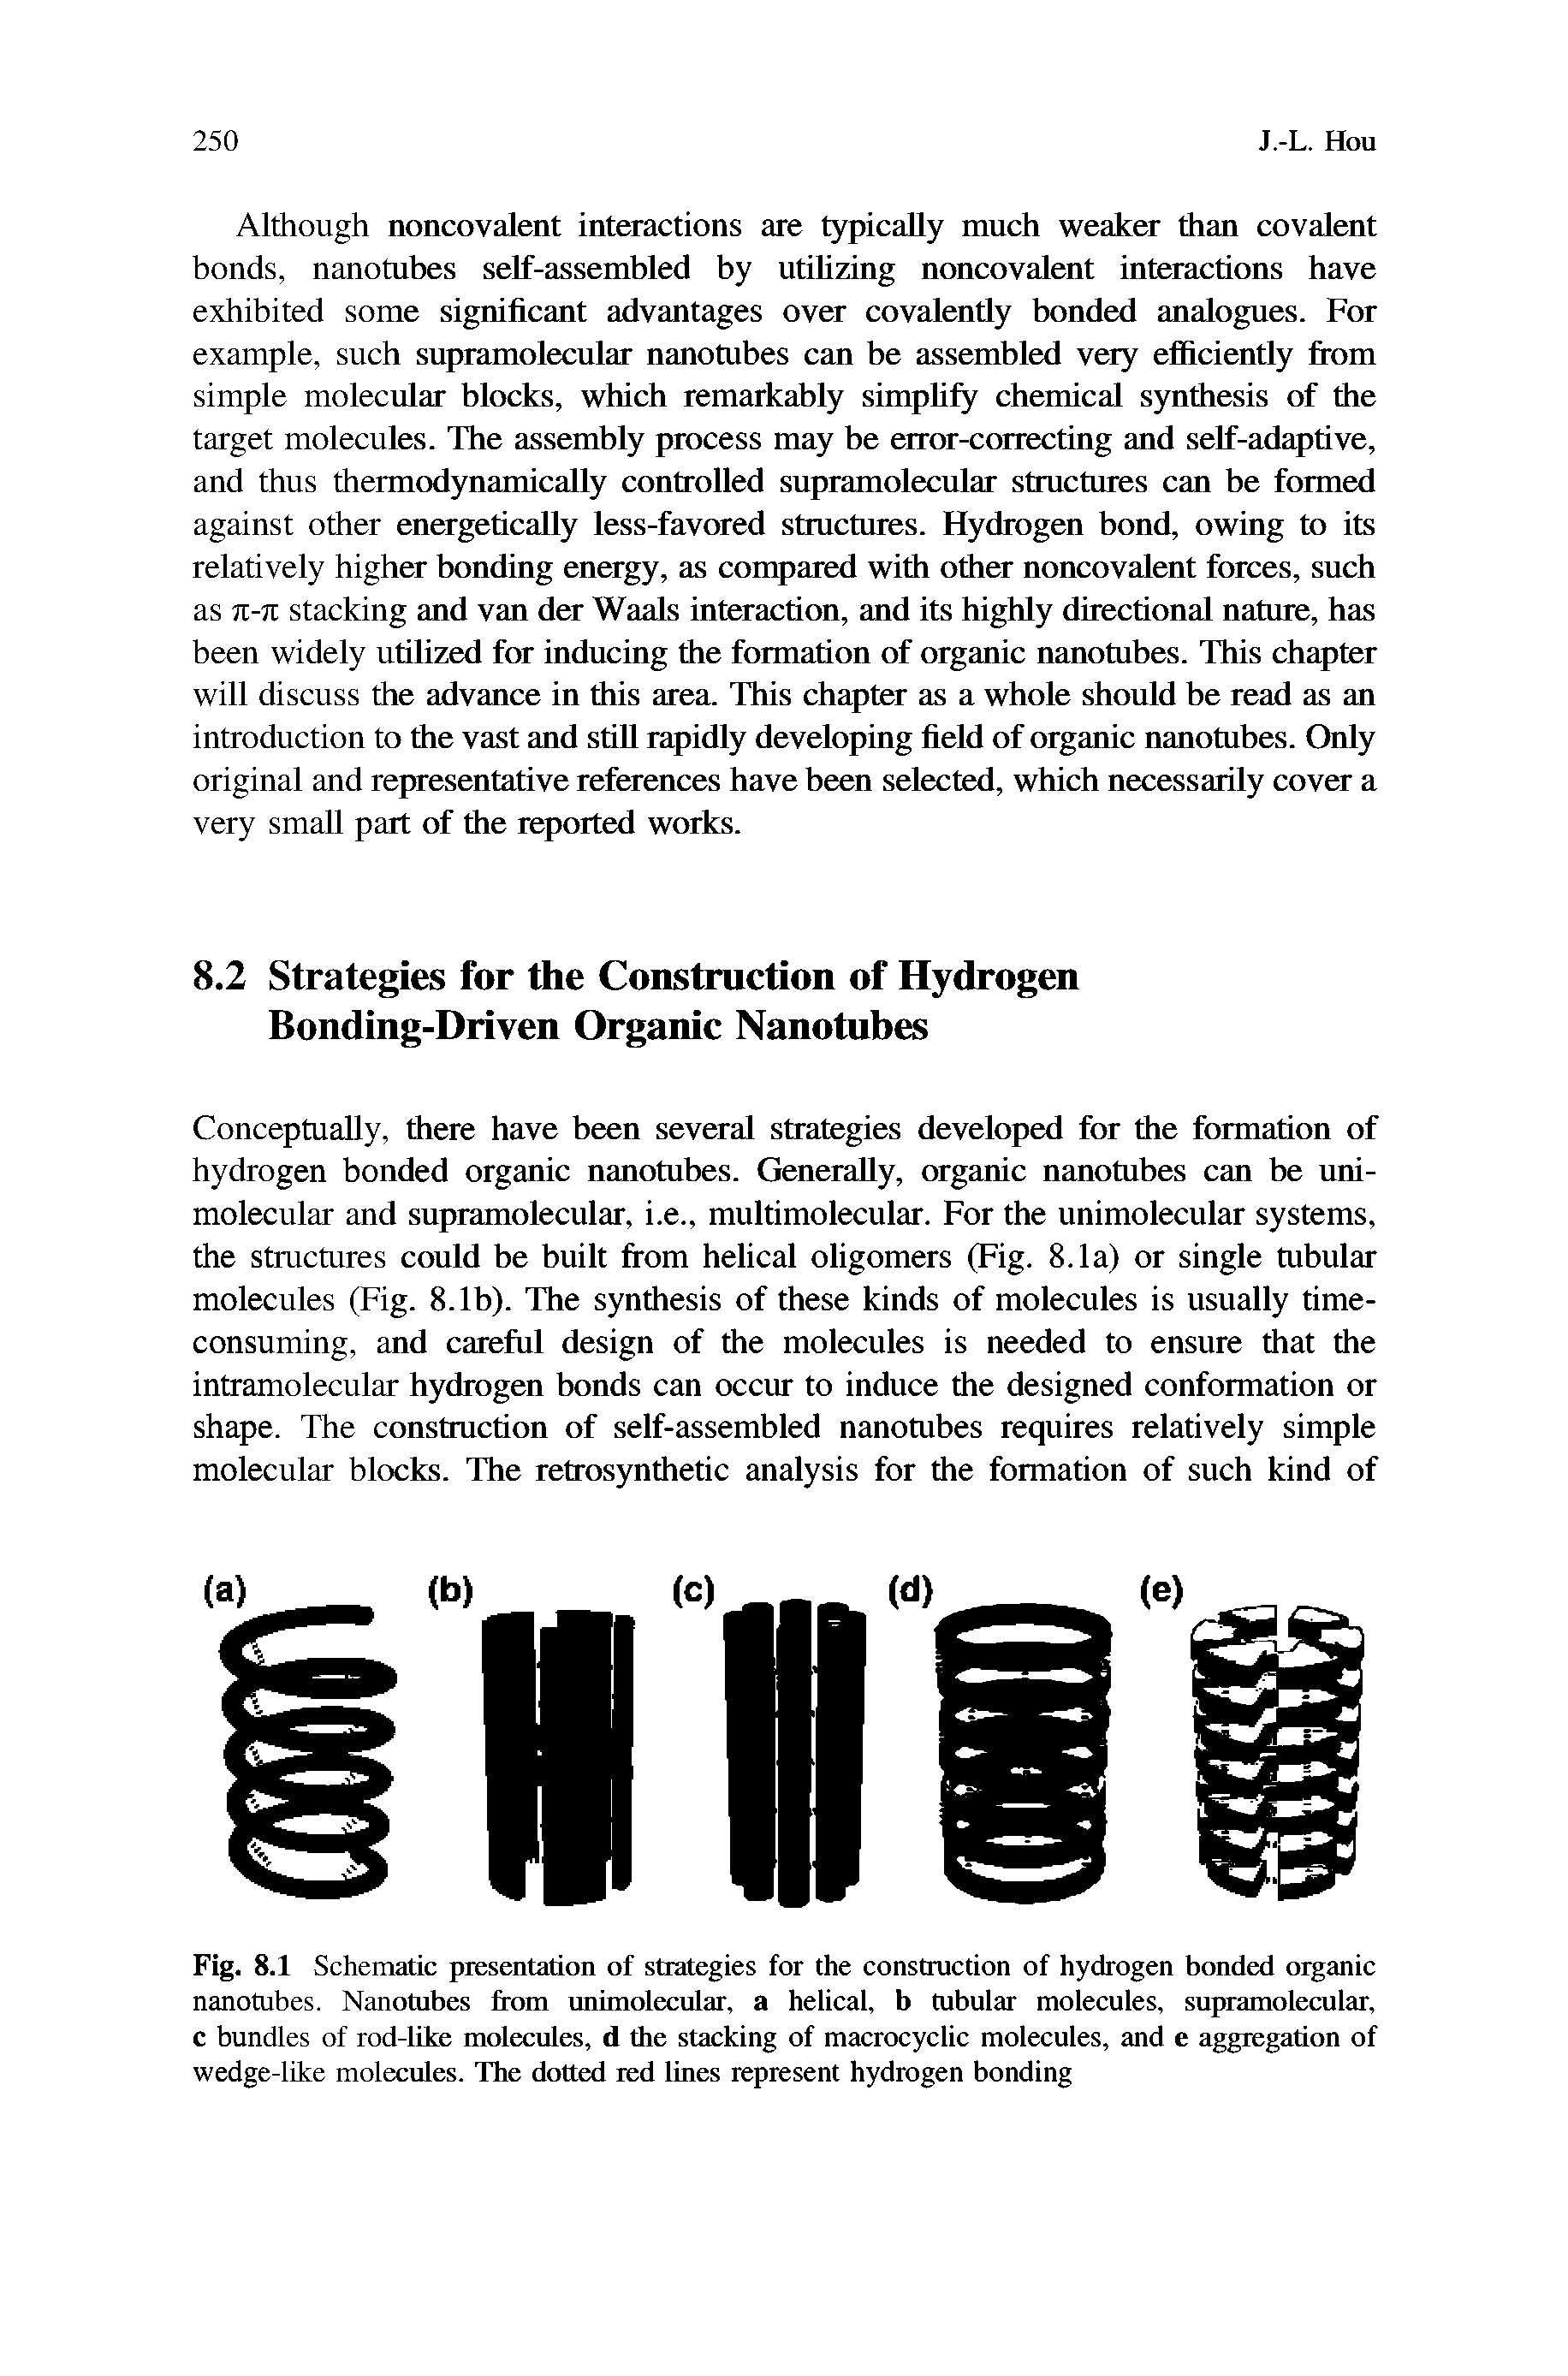 Fig. 8.1 Schematic presentation of strategies for the construction of hydrogen bonded organic nanotubes. Nanotubes from unimolecular, a helical, b tubular molecules, supramolecular, c bundles of rod-like molecules, d the stacking of macrocyclic molecules, and e aggregation of wedge-like molecules. The dotted red lines represent hydrogen bonding...